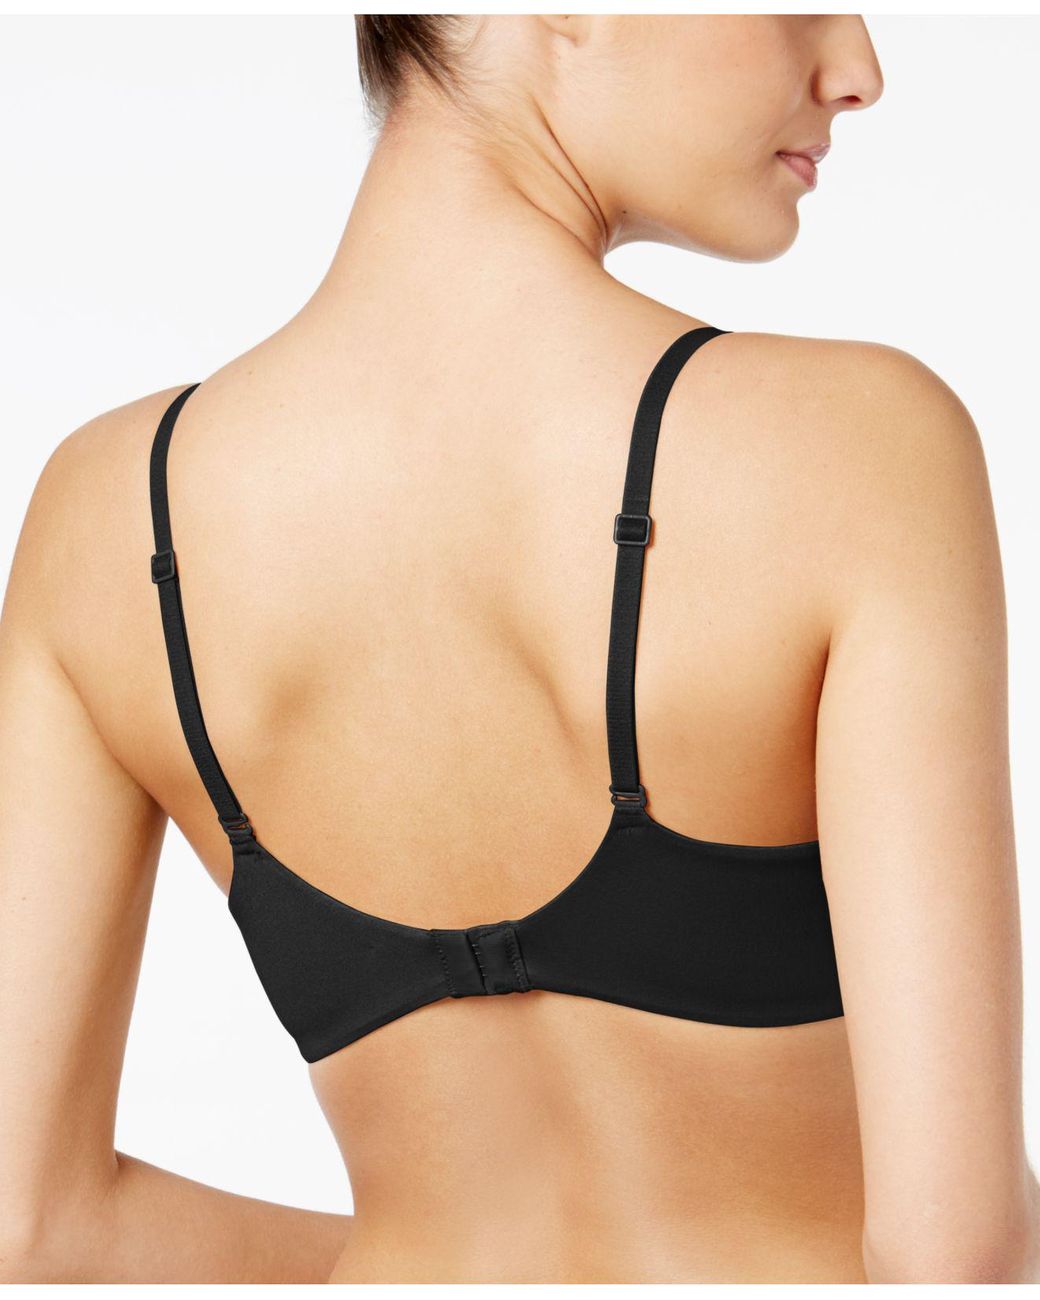 Calvin Klein Seductive Comfort With Lace Full Coverage Bra QF1741 - Macy's